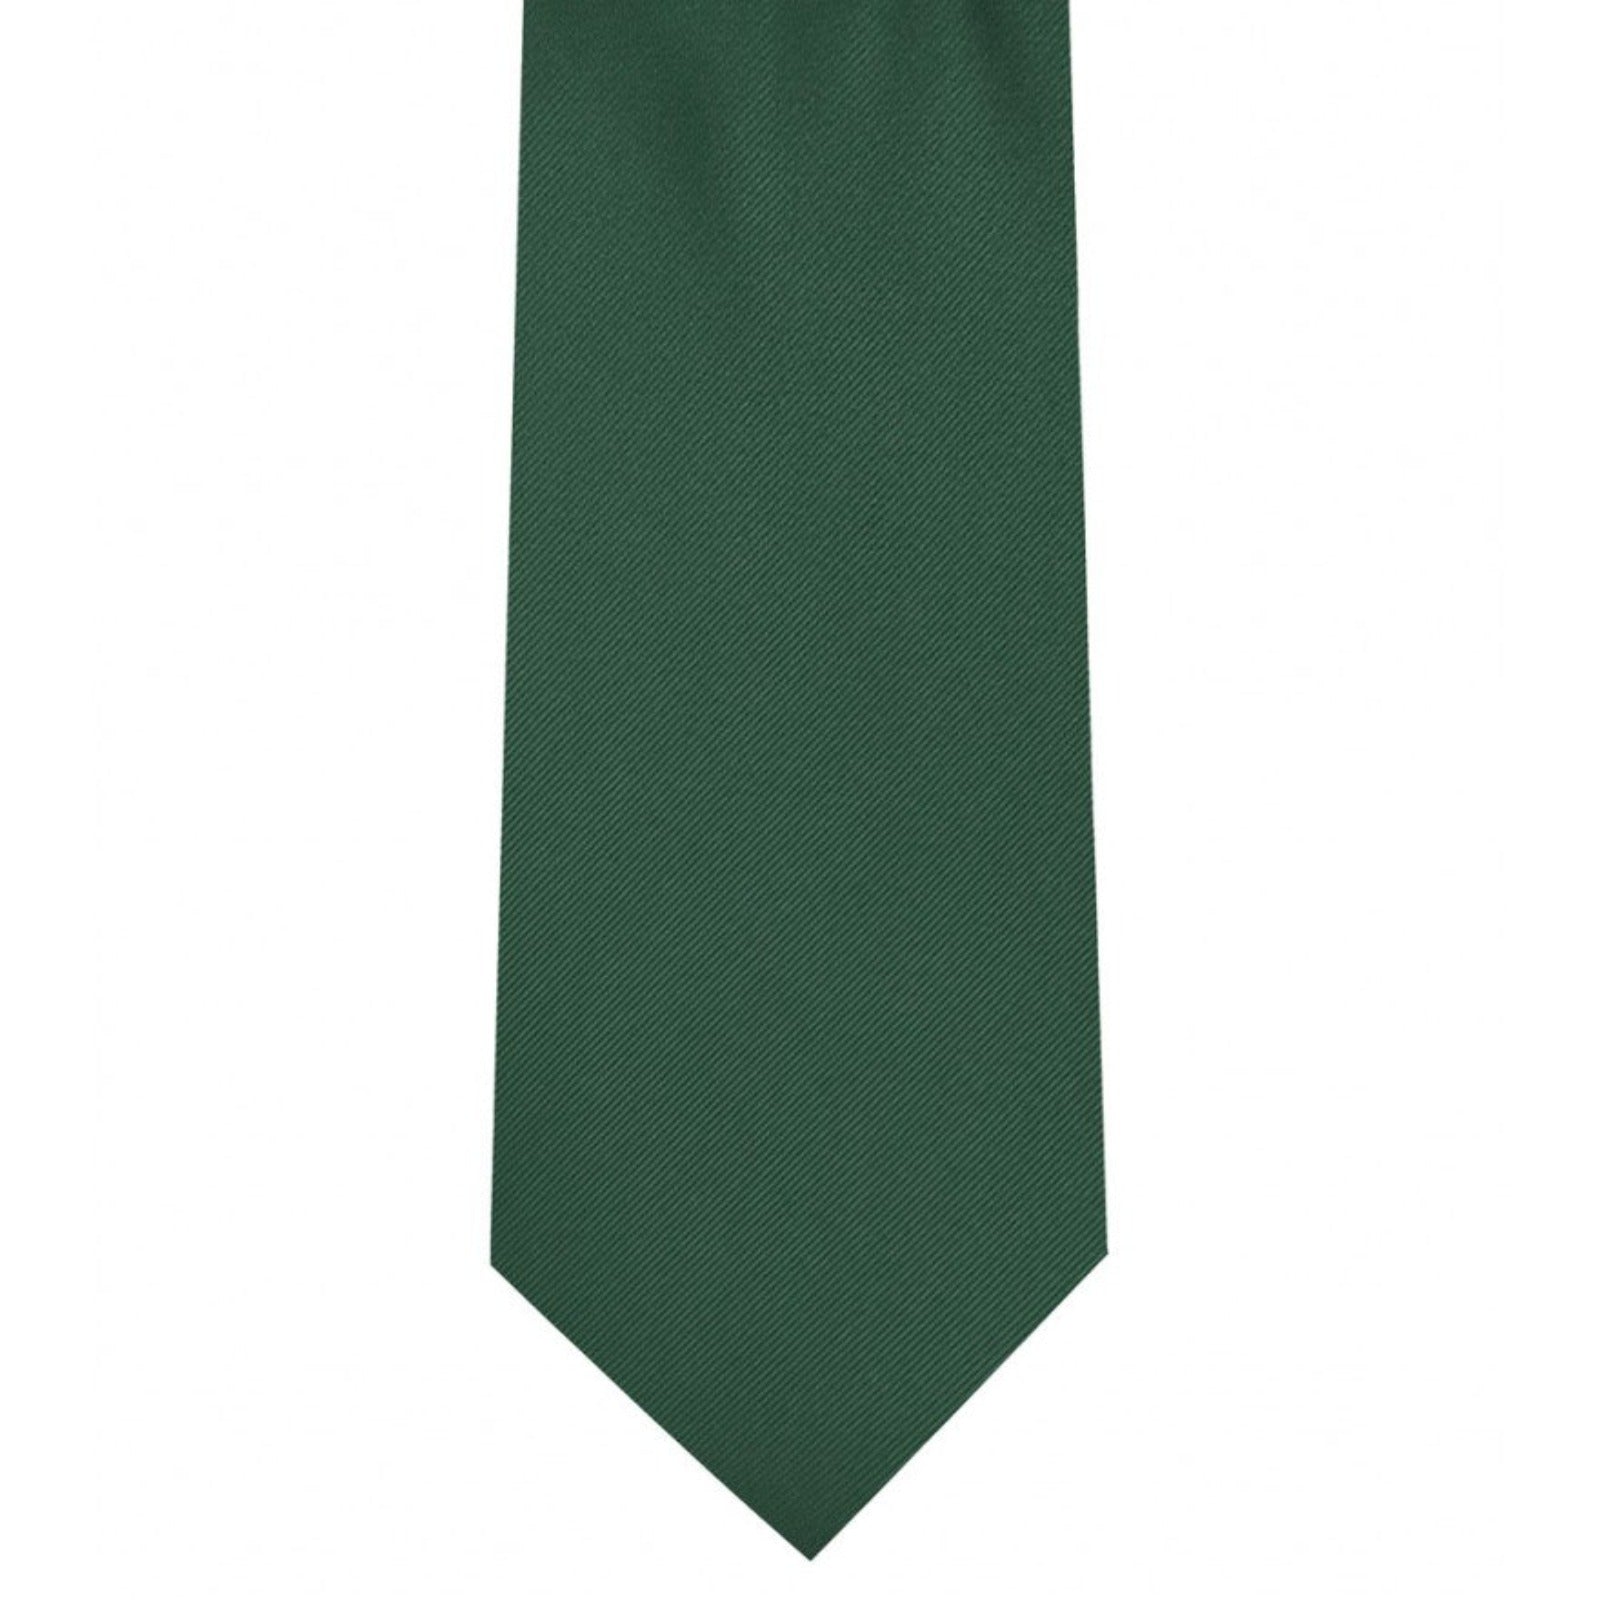 Classic Forest Green Tie Ultra Skinny tie width 2.25 inches With Matching Pocket Square | KCT Menswear